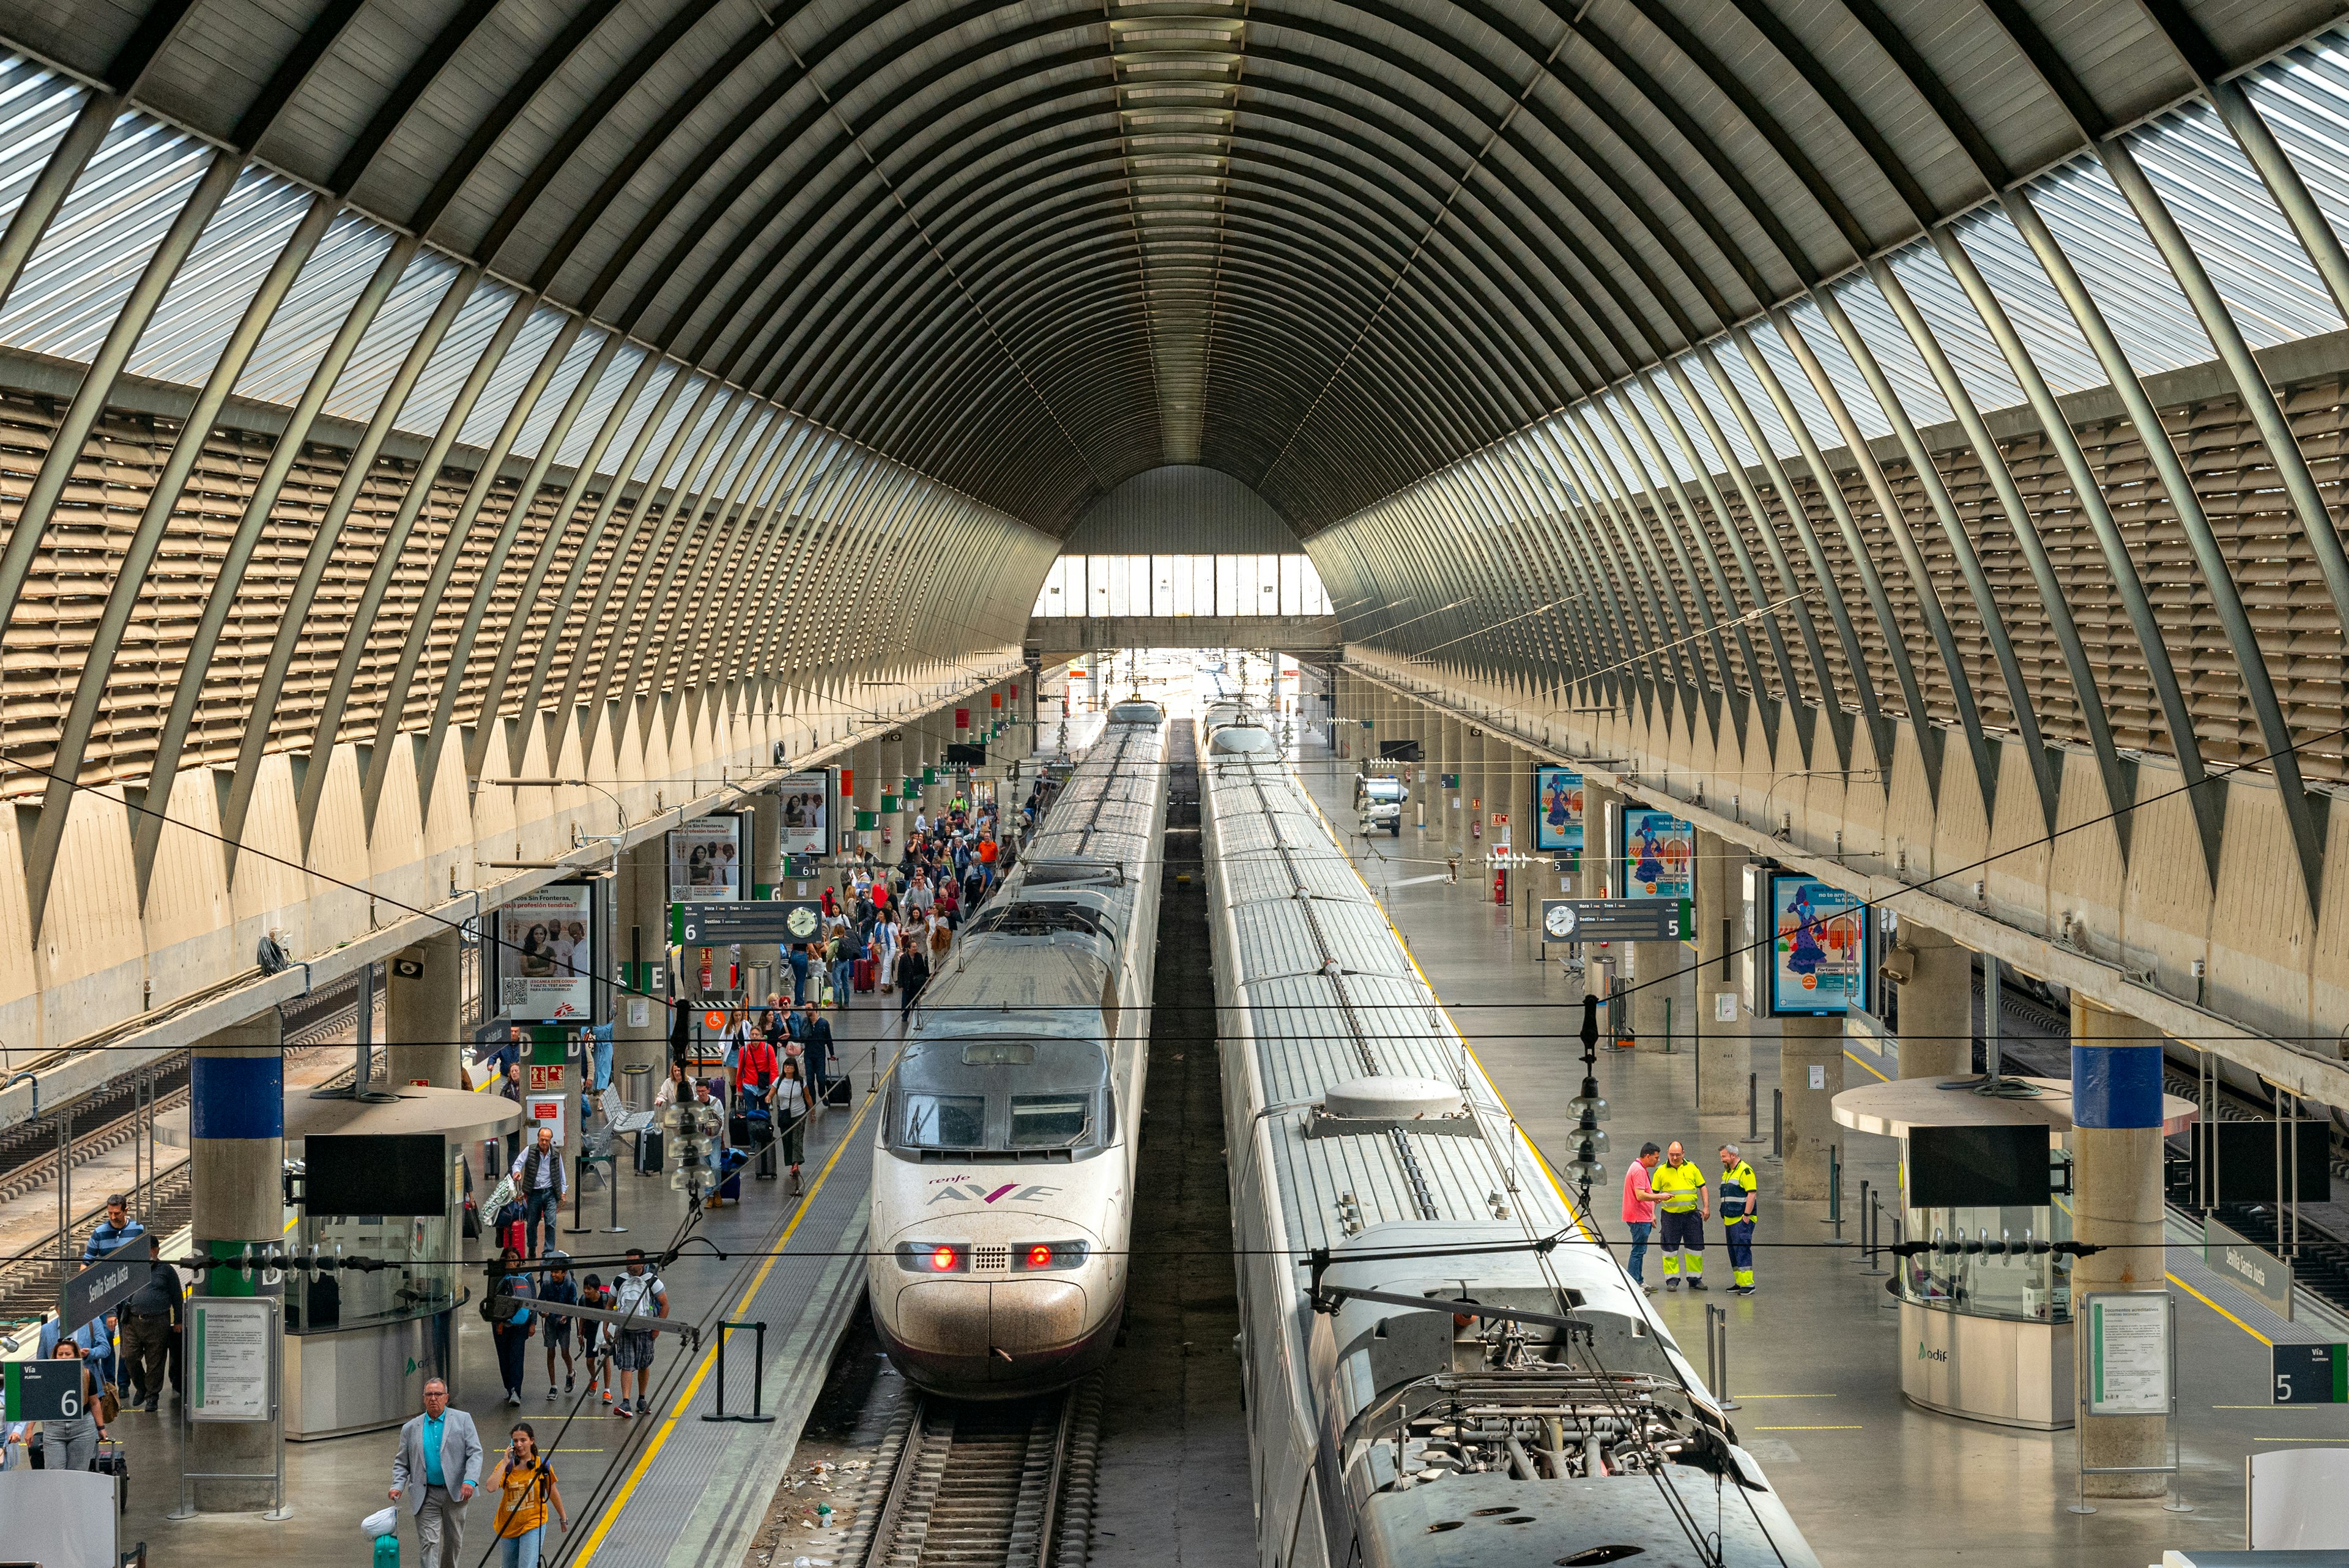 A journey aboard a Renfe train from the Atocha Station in Madrid is your first step on a flight-free Spanish adventure.